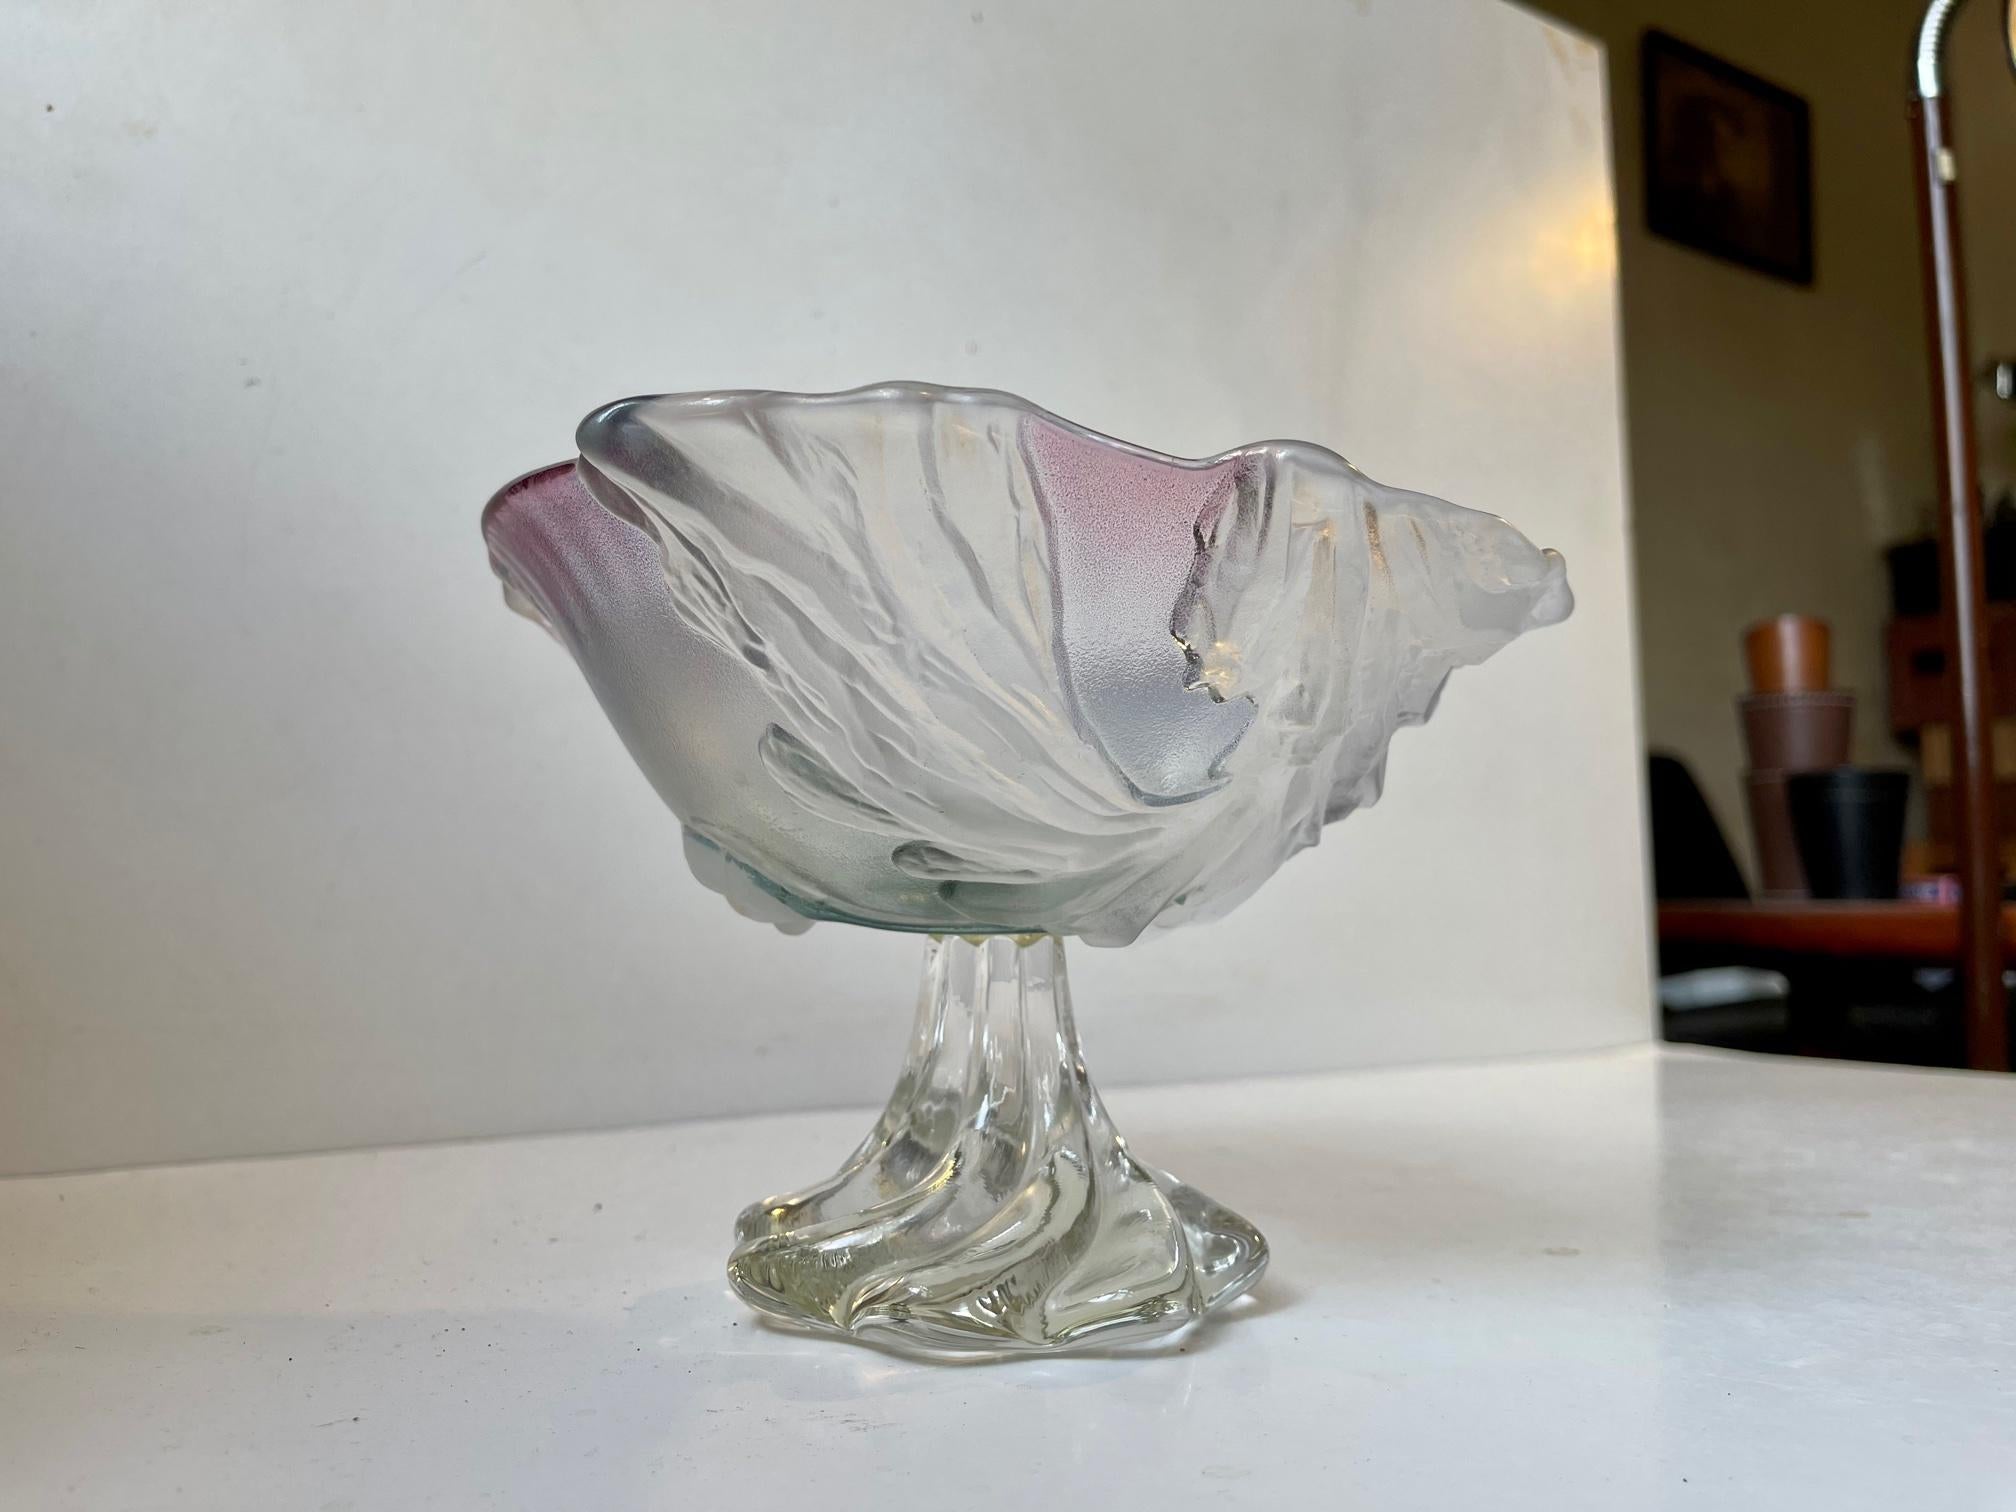 A delicate art crystal glass bowl free-form in shape and decorated with leaves and incapsulated splashes of pink and blue. It was made in France or Italy in a style reminiscent of Daum's Botanics series. It has no markings to its twisted base.